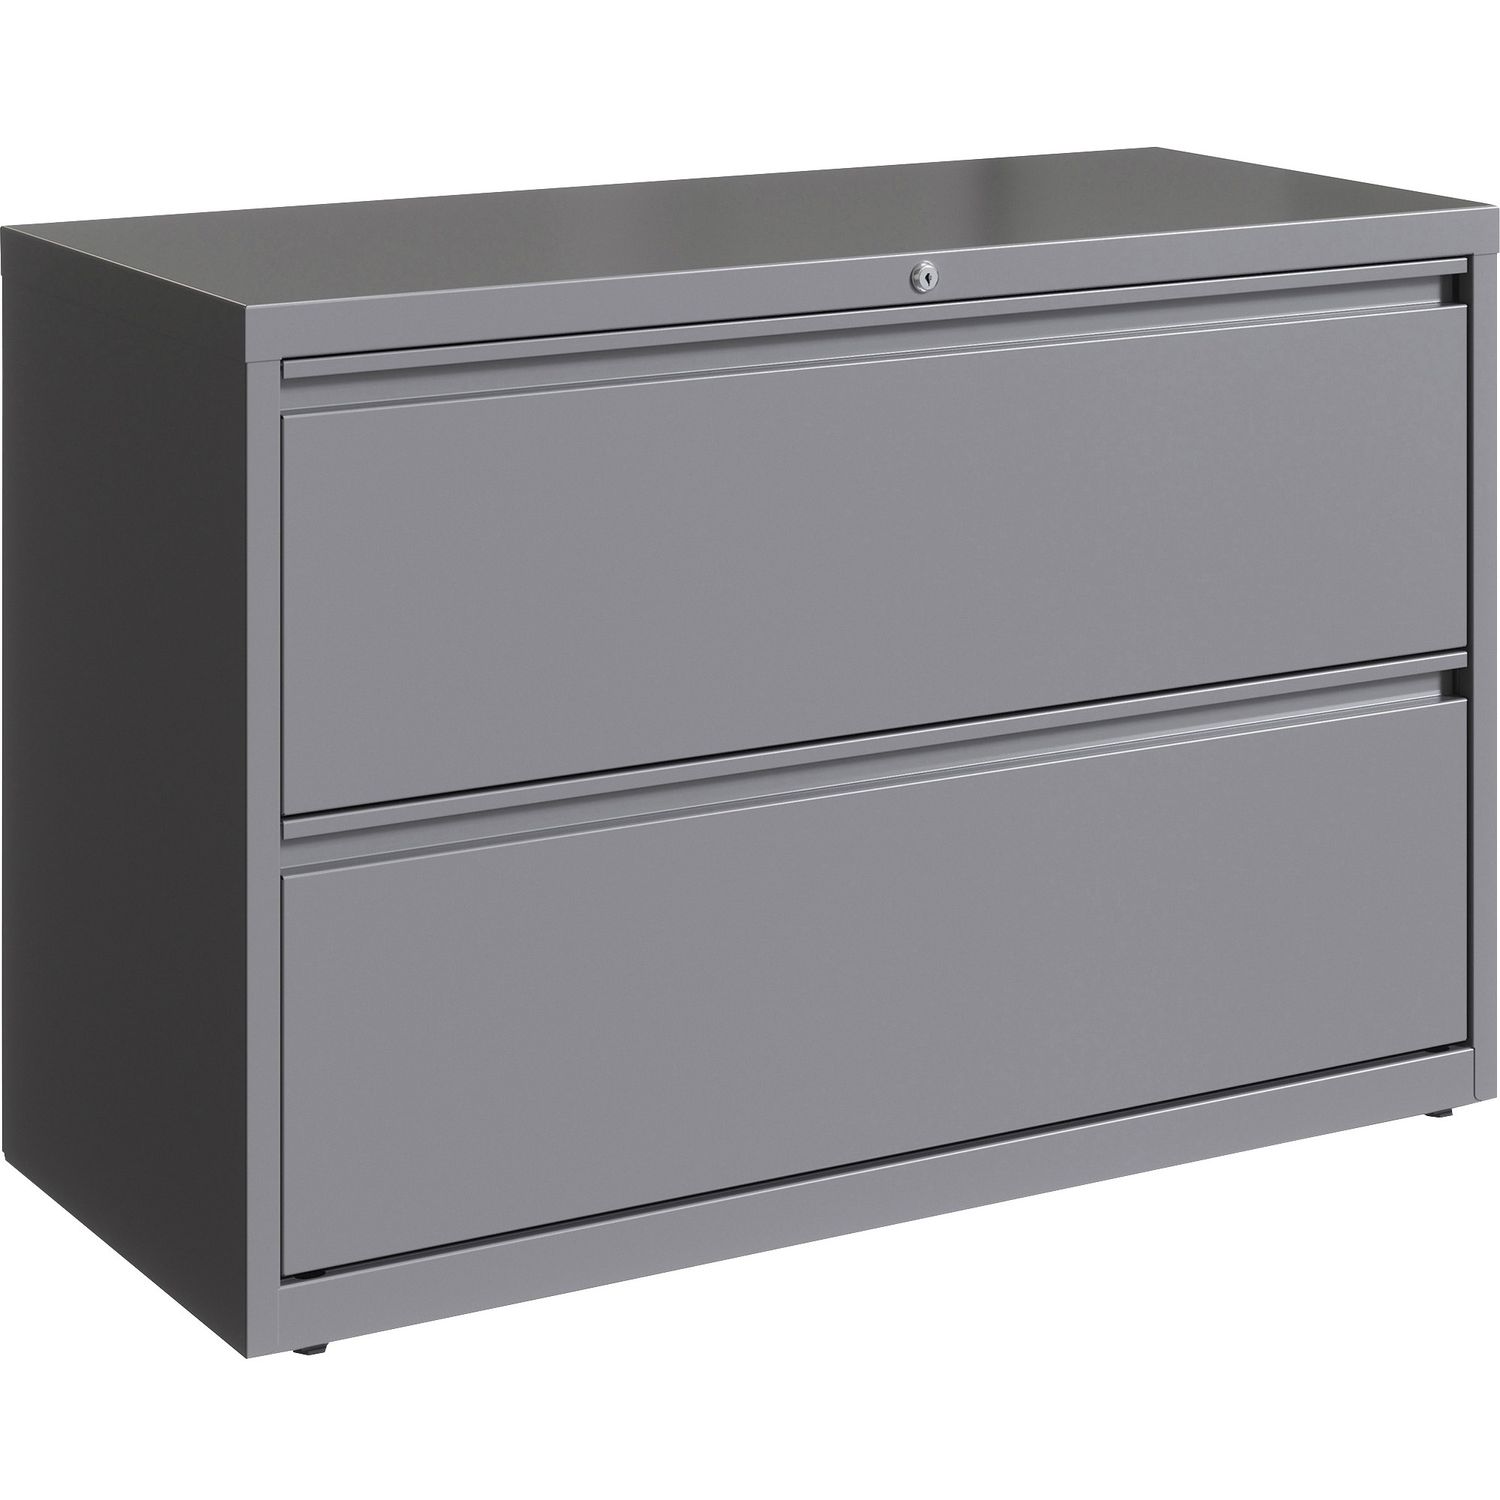 42" Silver Lateral File - 2-Drawer 42" x 18.6" x 28", 2 x Drawer(s) for File, Letter, Legal, A4